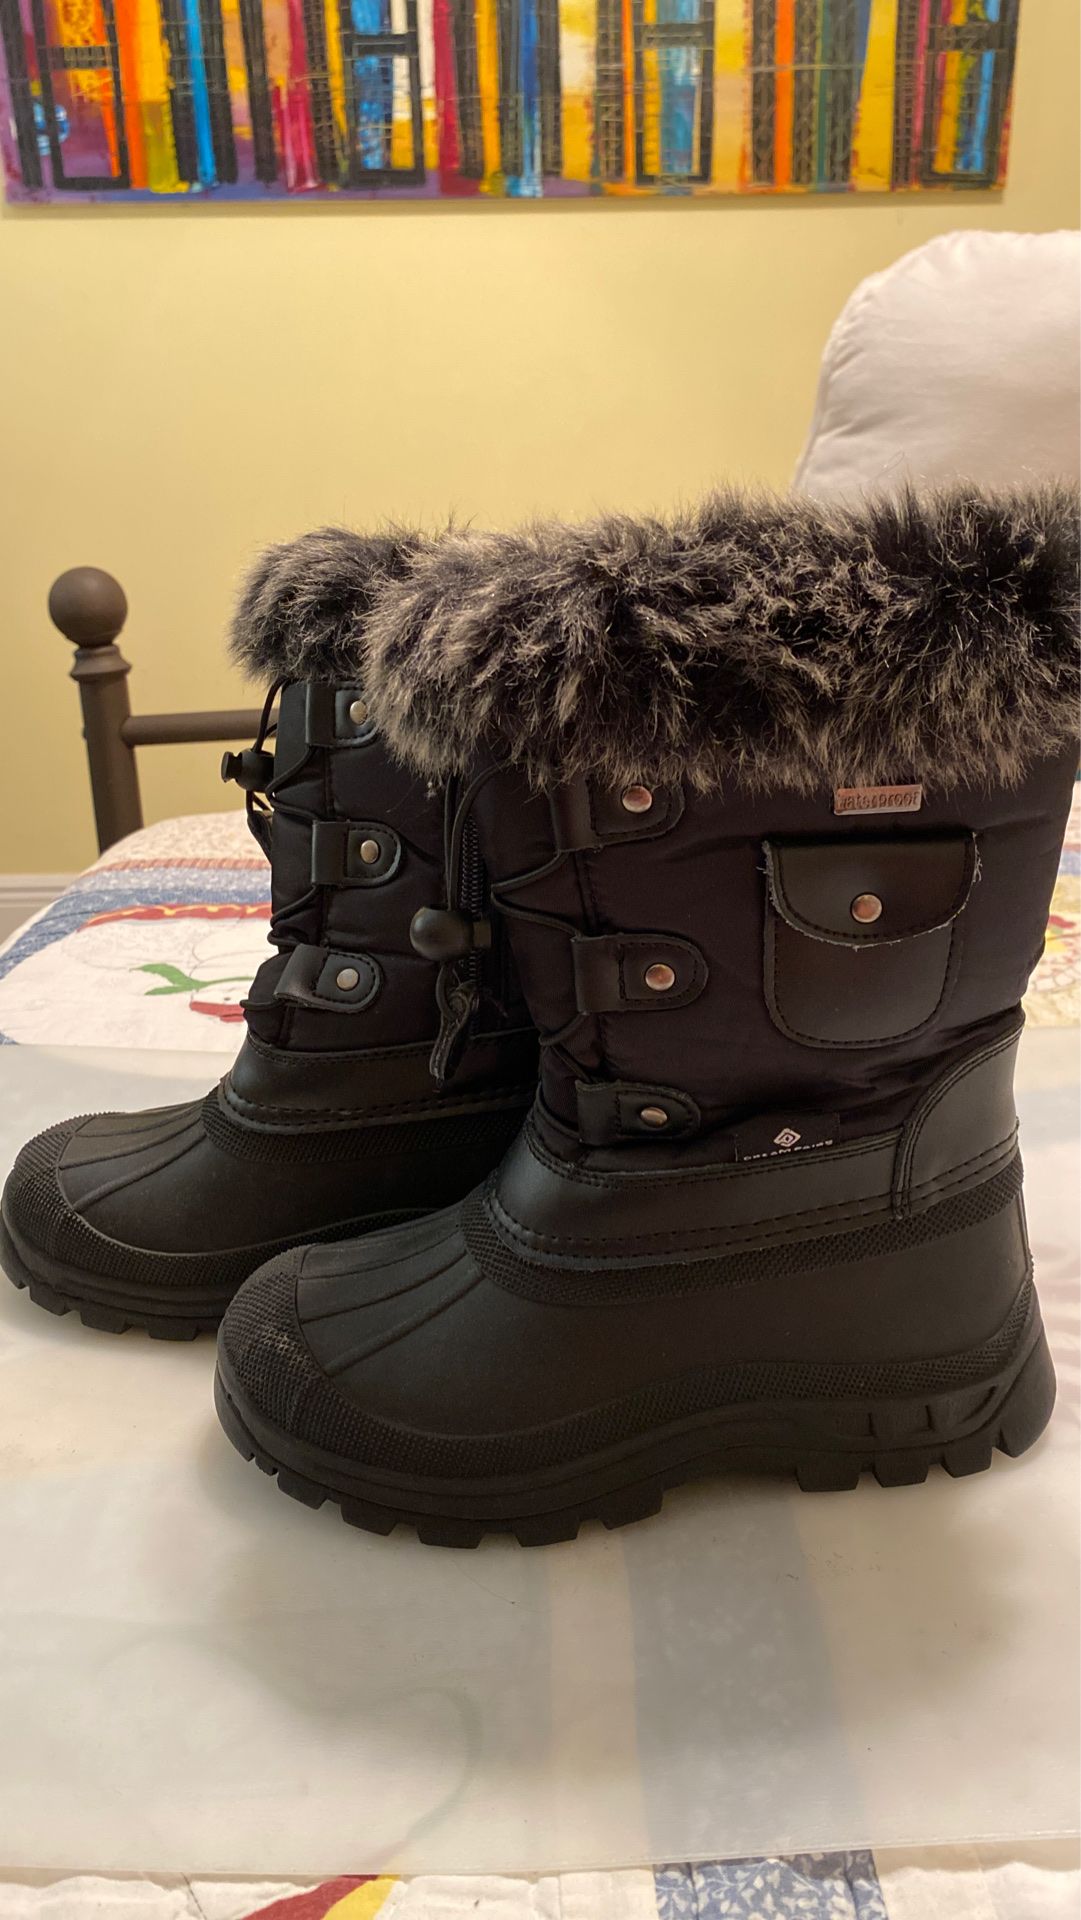 Snow Boots size 13